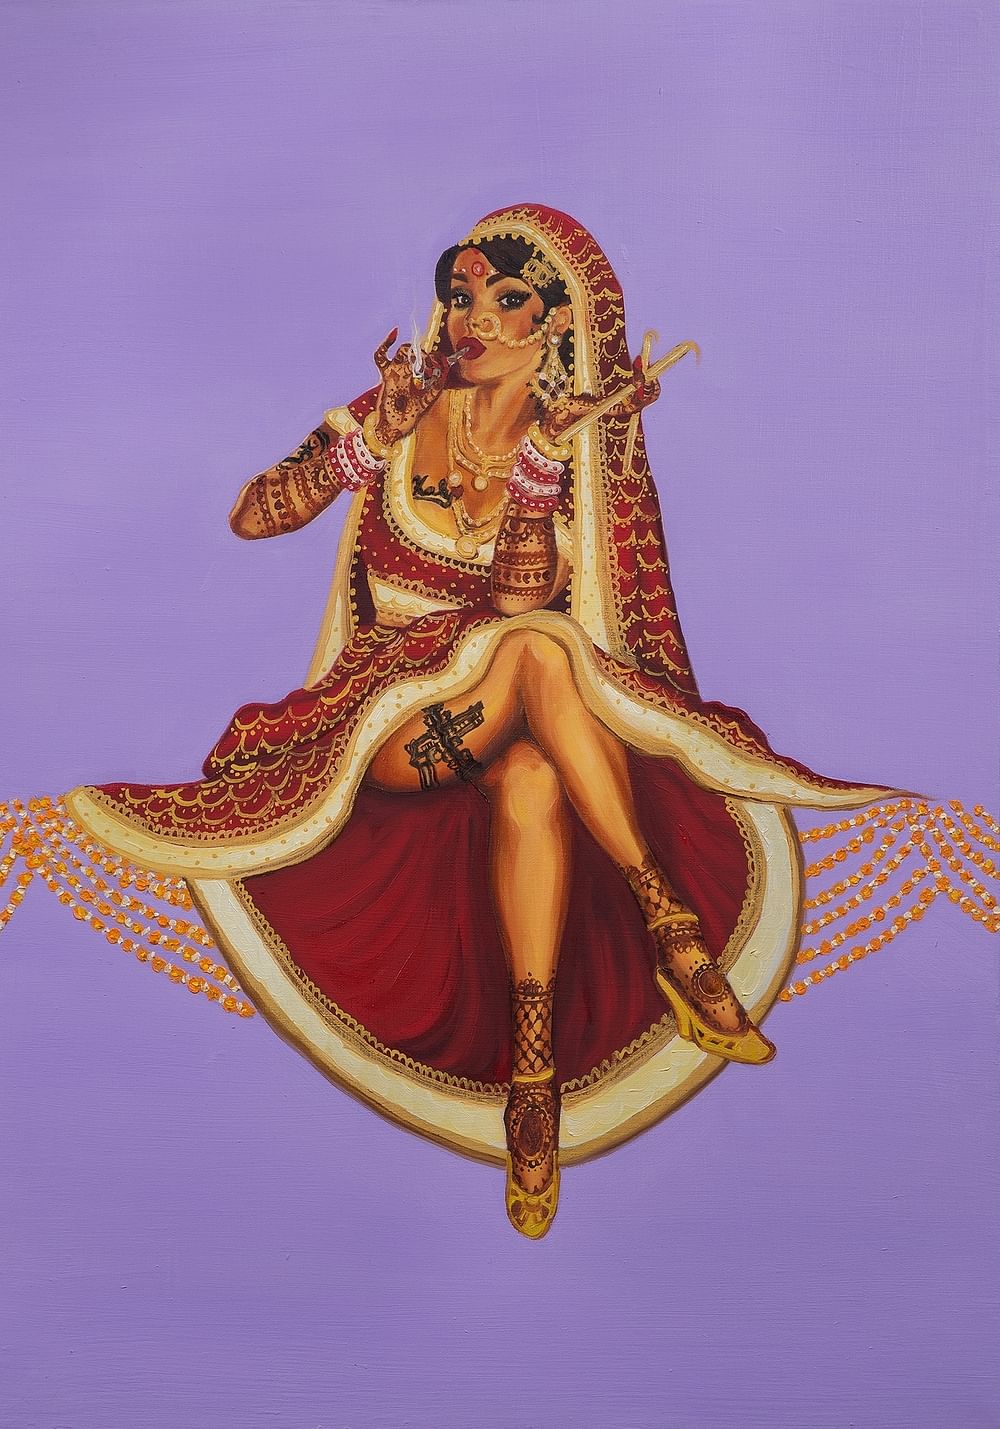 The roots of these Indian-origin girls have assumed shape in their artwork.